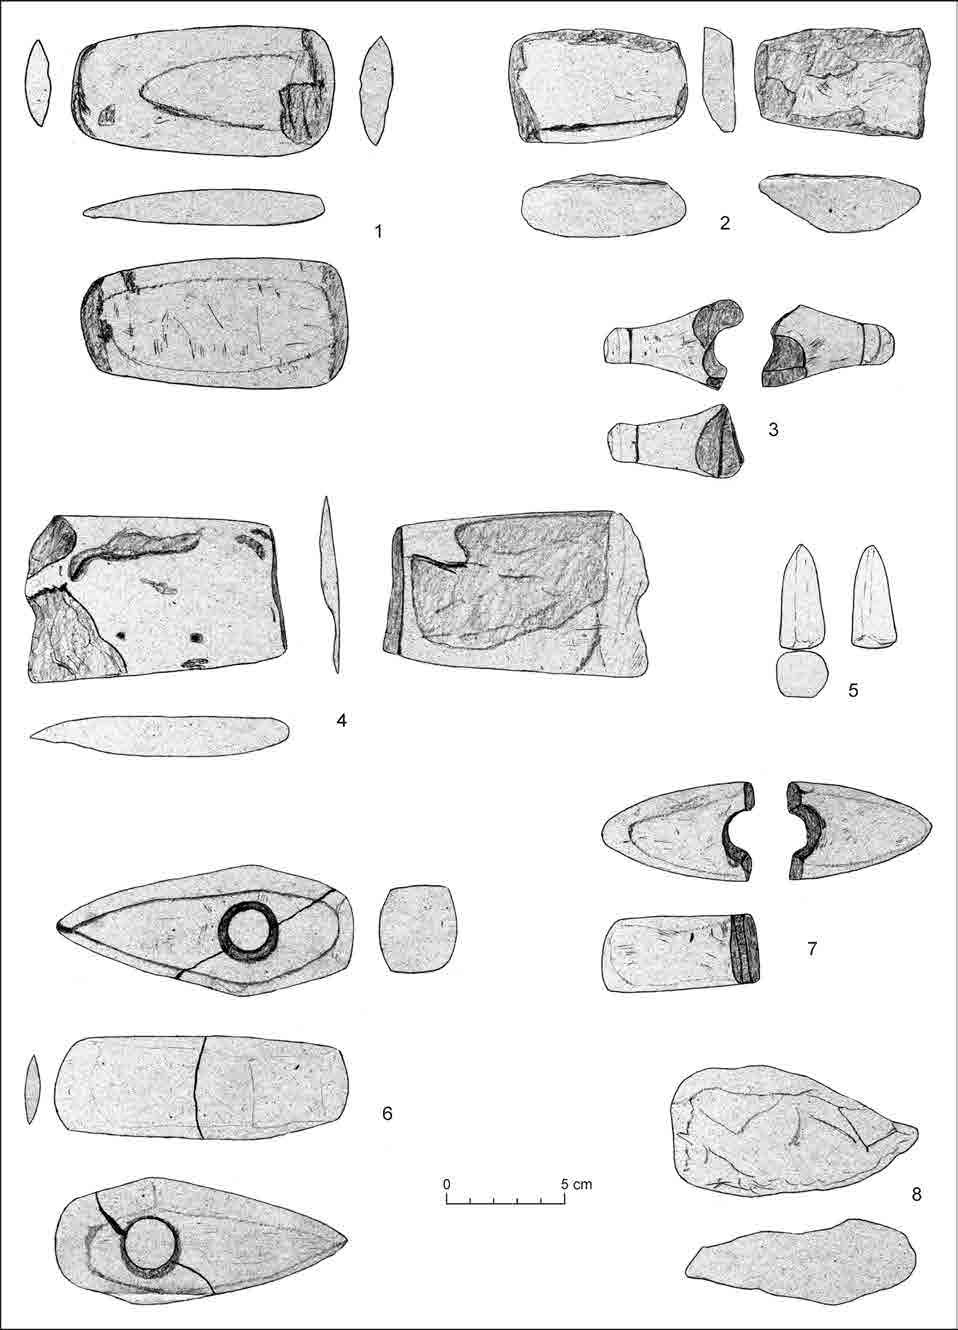 THE STONE IMPLEMENTS OF THE MIDDLE BRONZE AGE TELL SETTLEMENT OF